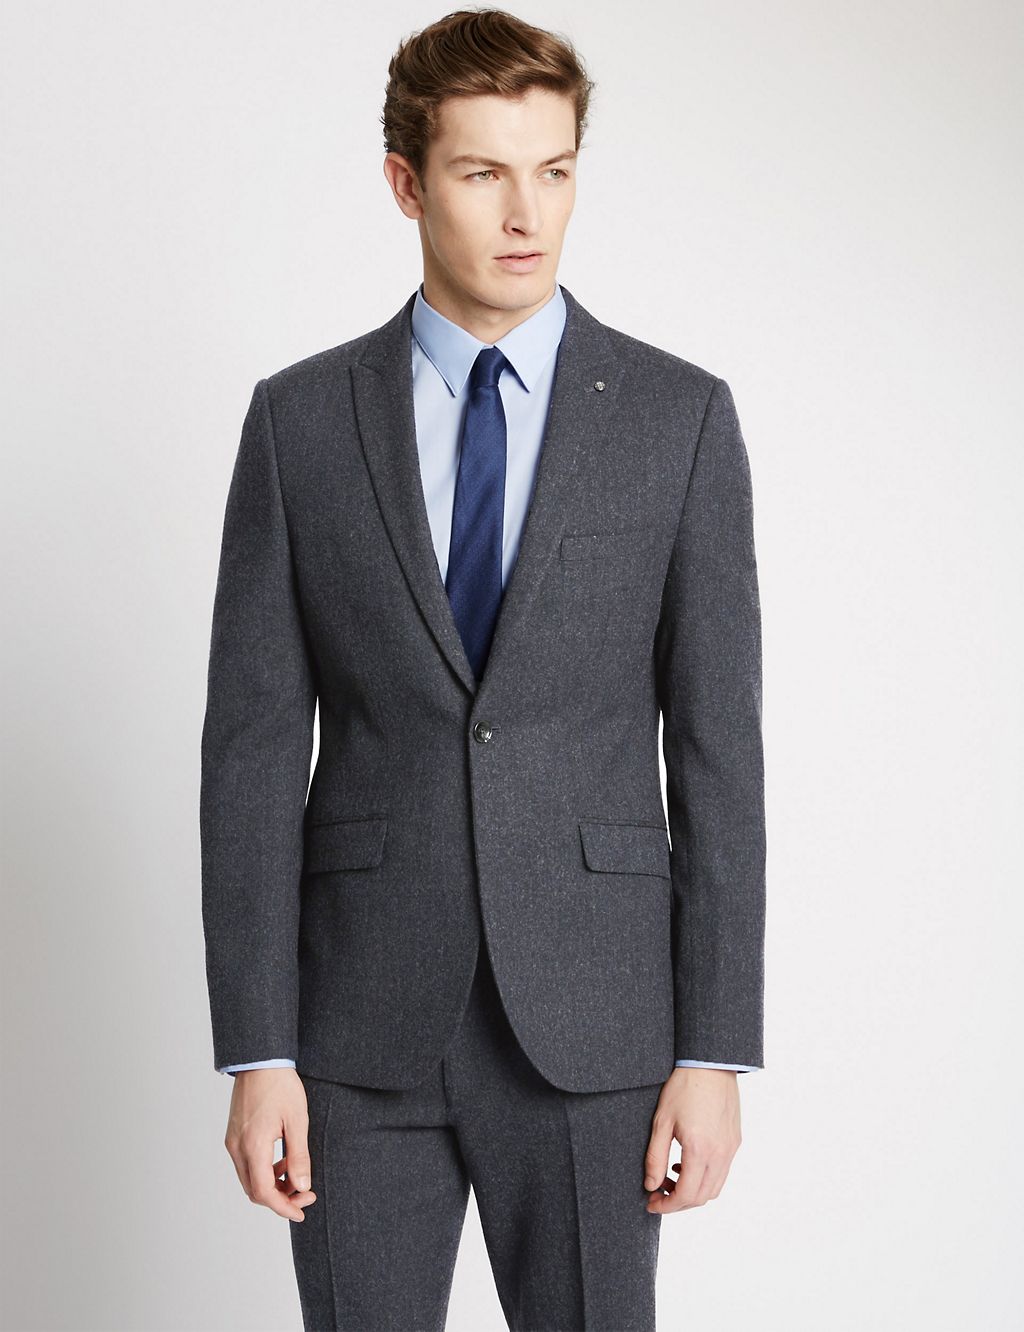 Navy Textured Modern Tailored Fit Jacket 2 of 8